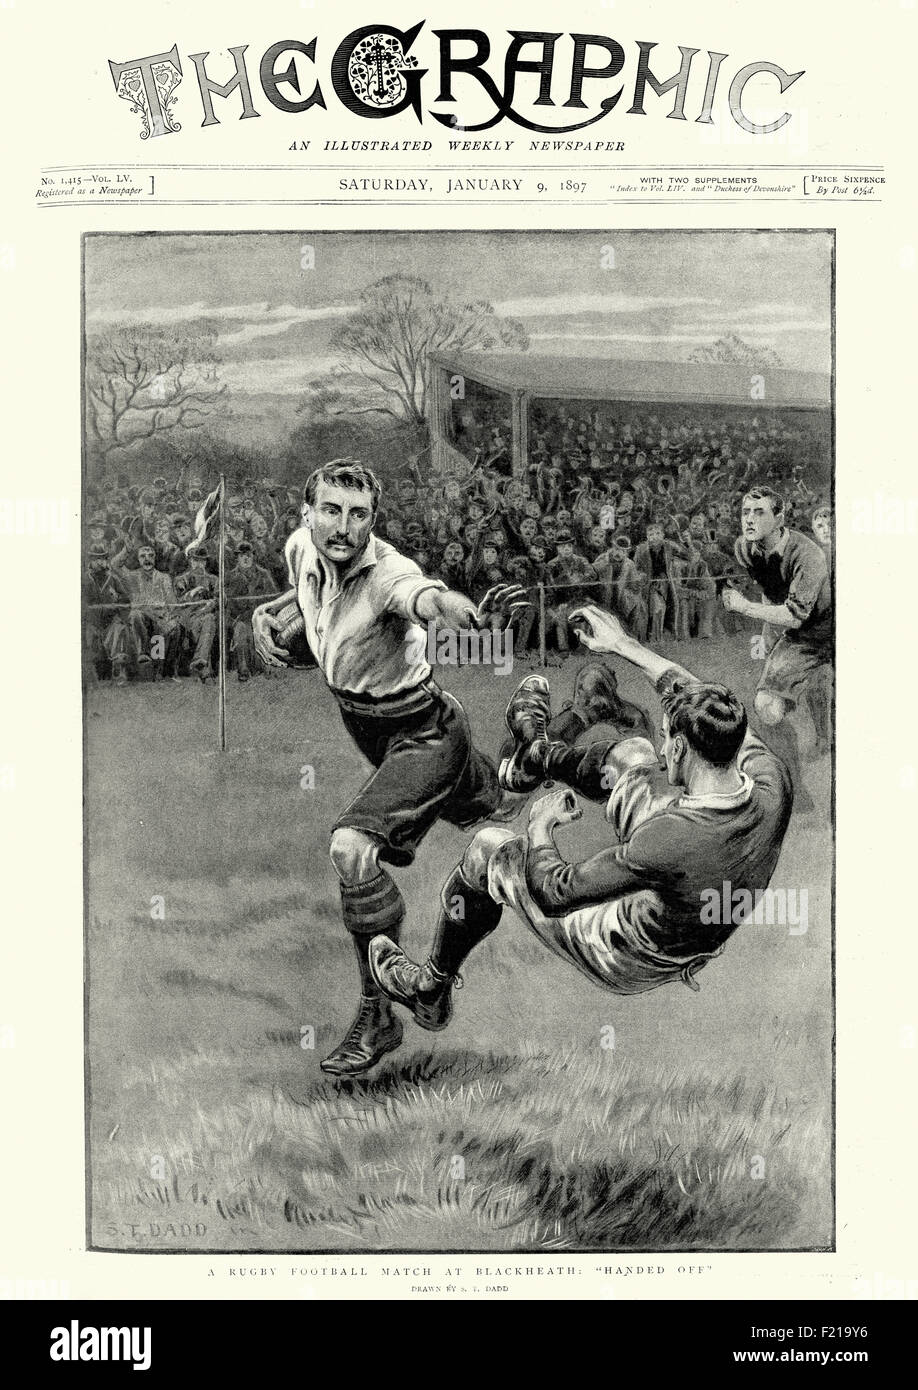 Vintage engraving of a Victorian Rugby Football Match at Blackheath. The Graphic, 1897 Stock Photo